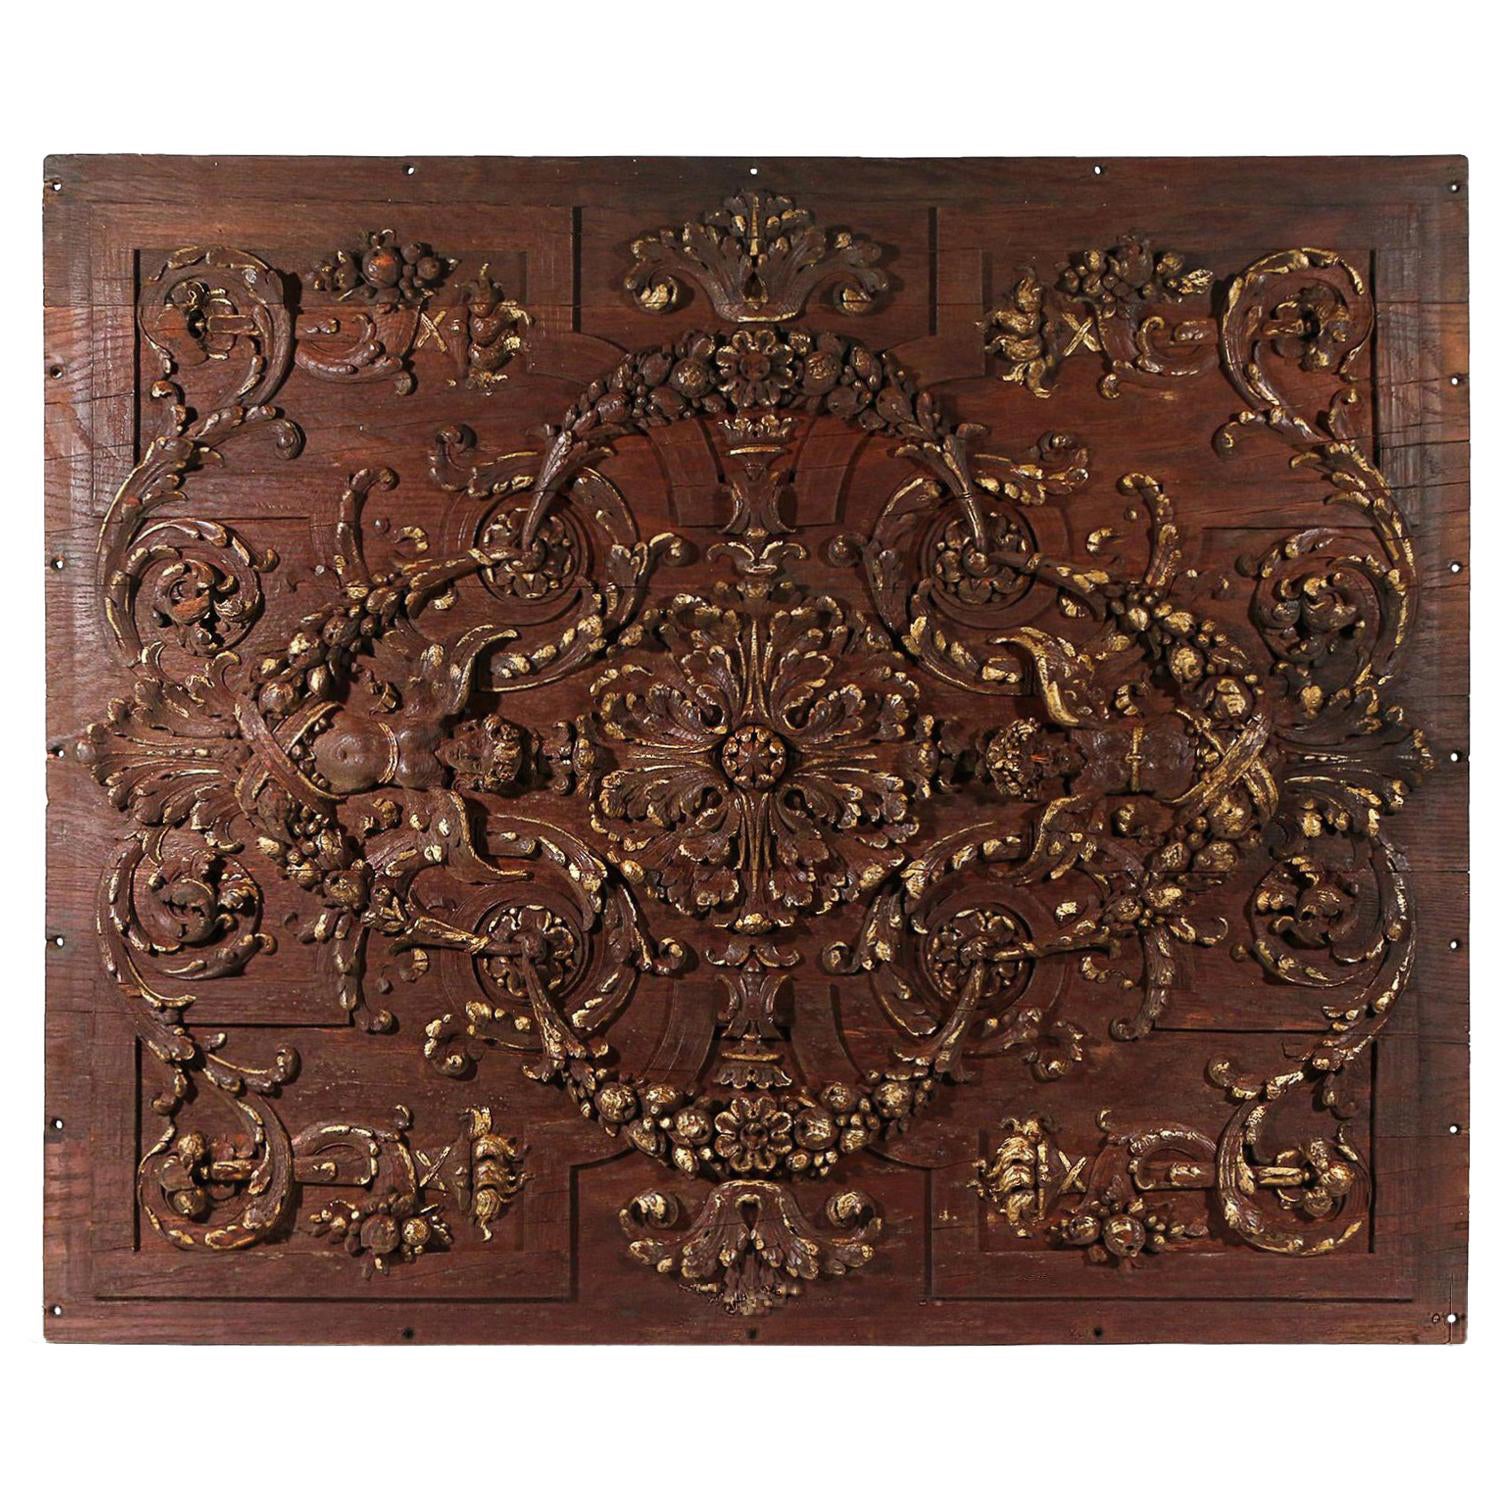 18th-19th Century Italian Walnut Rococo Carved Wall - Antique Ceiling Panel For Sale